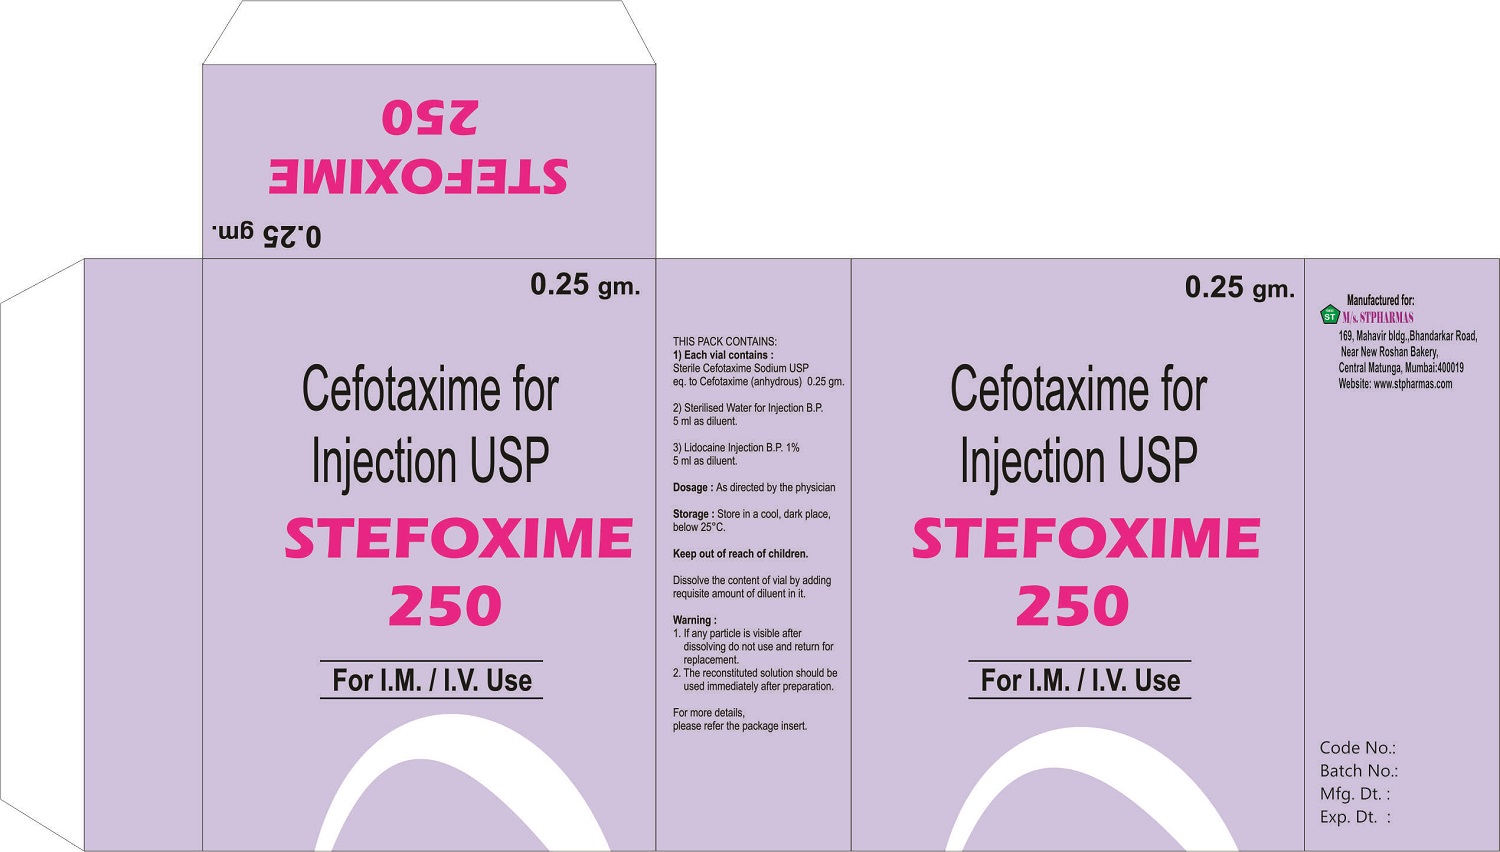 STEFOXIME-250